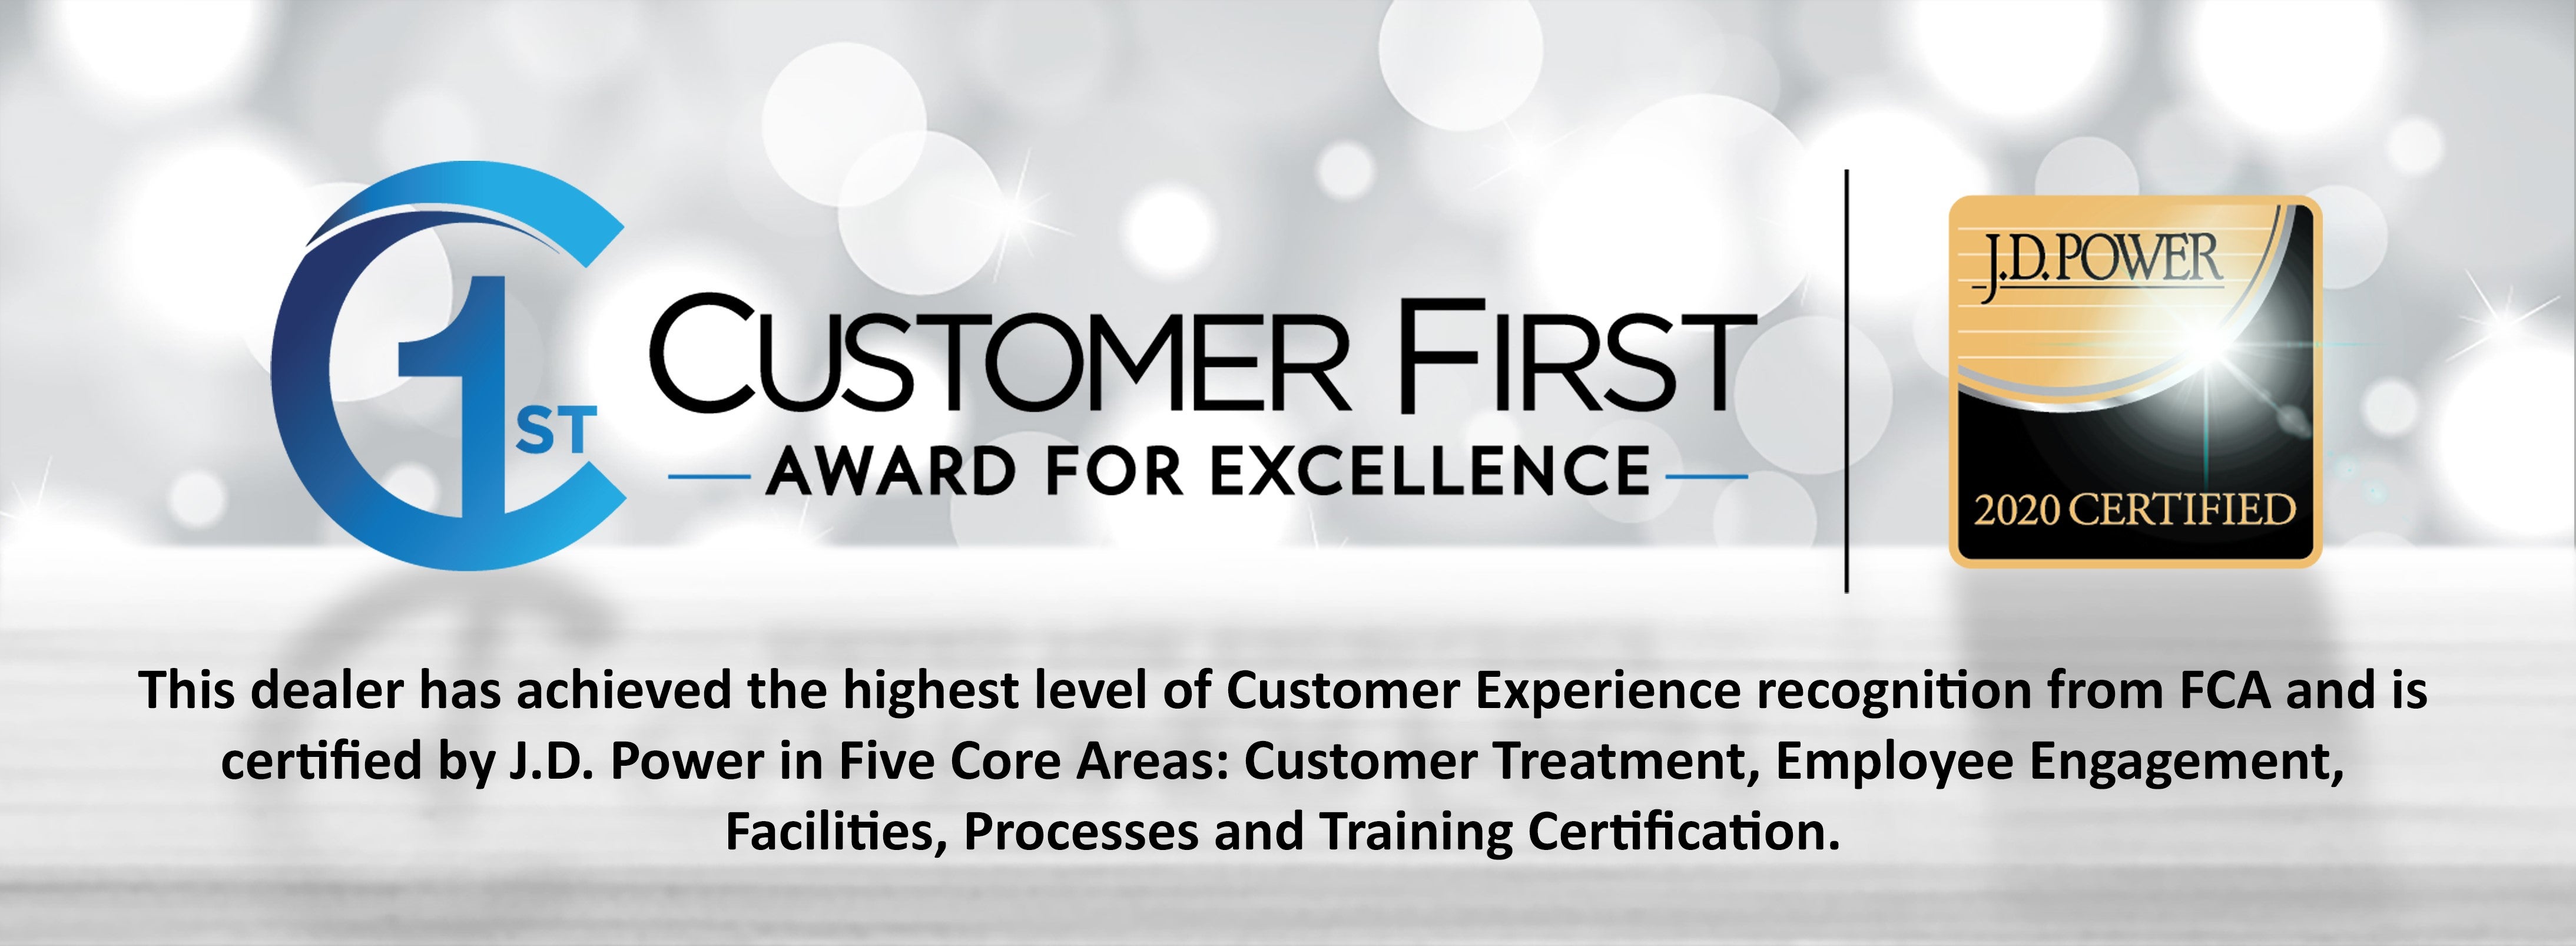 Customer First Award for Excellence for 2019 at Ed Morse Chrysler Dodge Jeep Ram New Athens in New Athens, IL